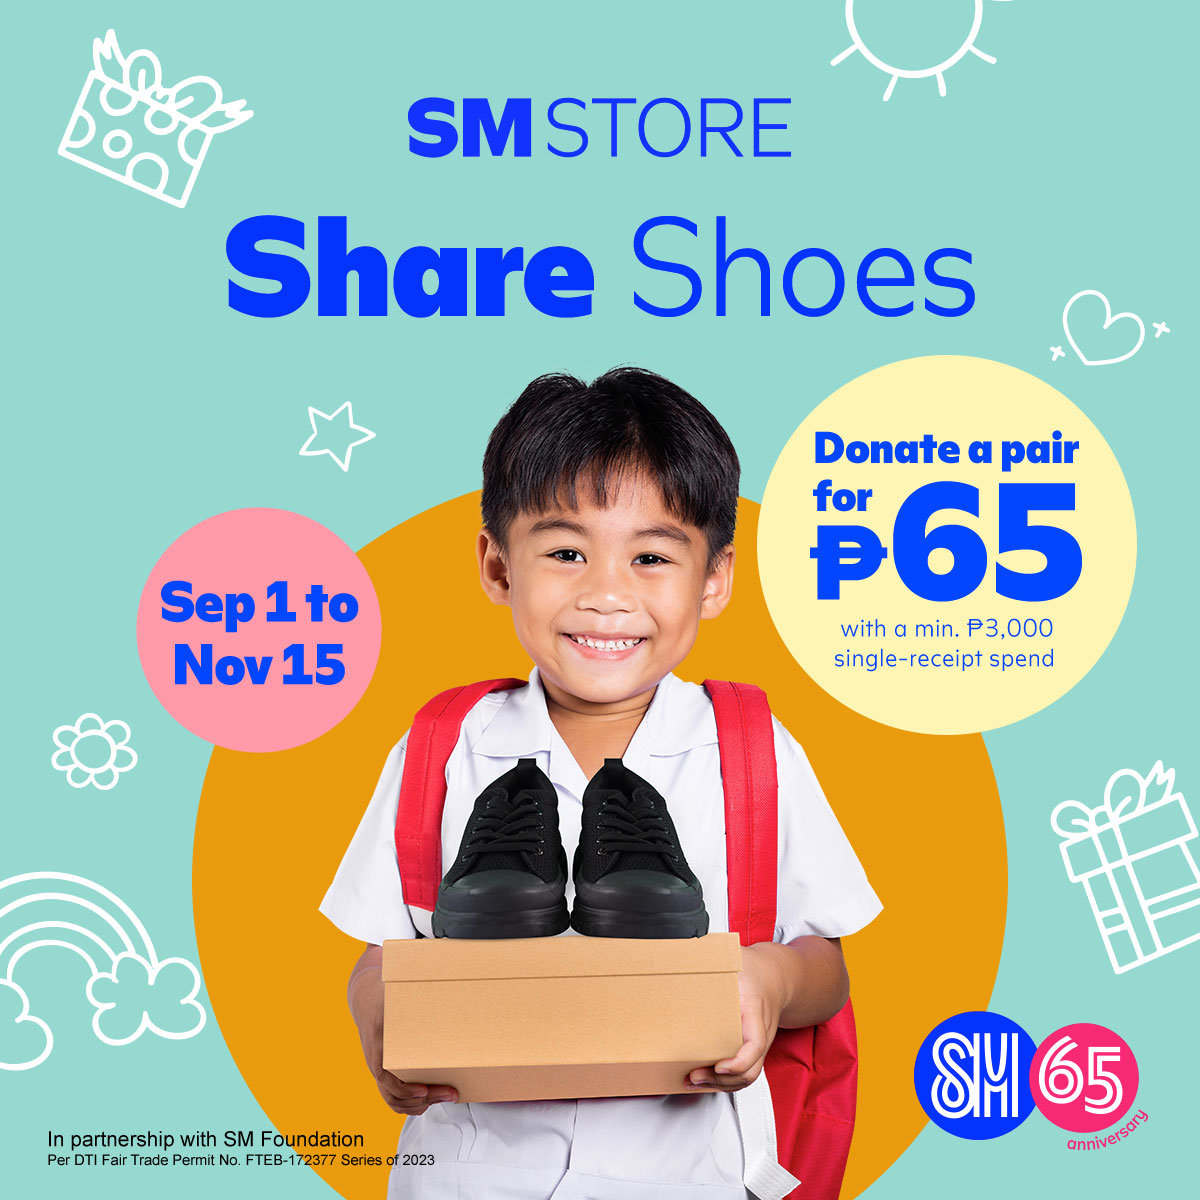 SM STORE CELEBRATES ITS 65TH FOUNDING ANNIVERSARY BY HELPING FILIPINO ...